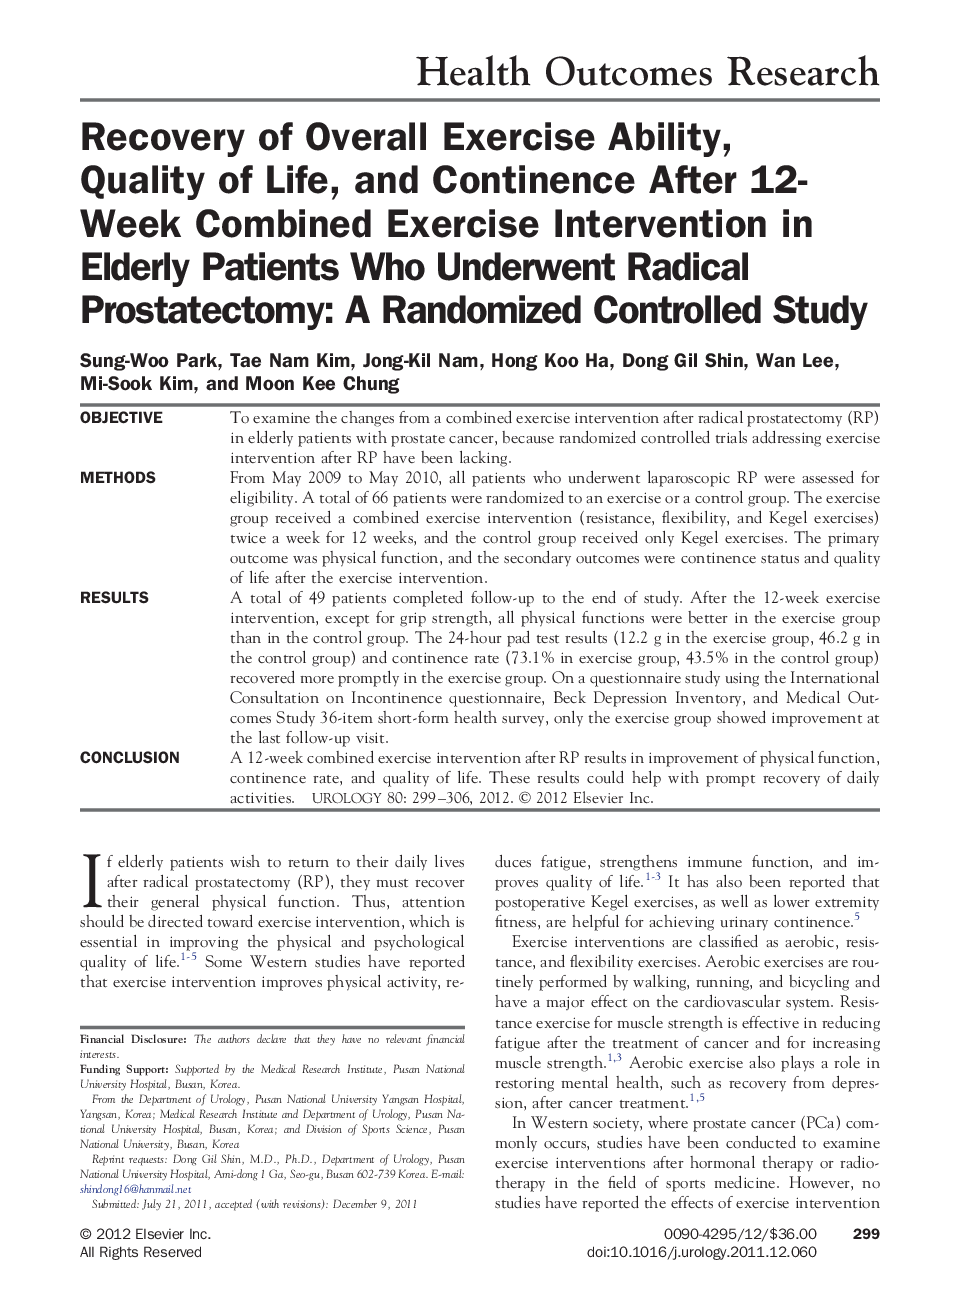 Recovery of Overall Exercise Ability, Quality of Life, and Continence After 12-Week Combined Exercise Intervention in Elderly Patients Who Underwent Radical Prostatectomy: A Randomized Controlled Study 